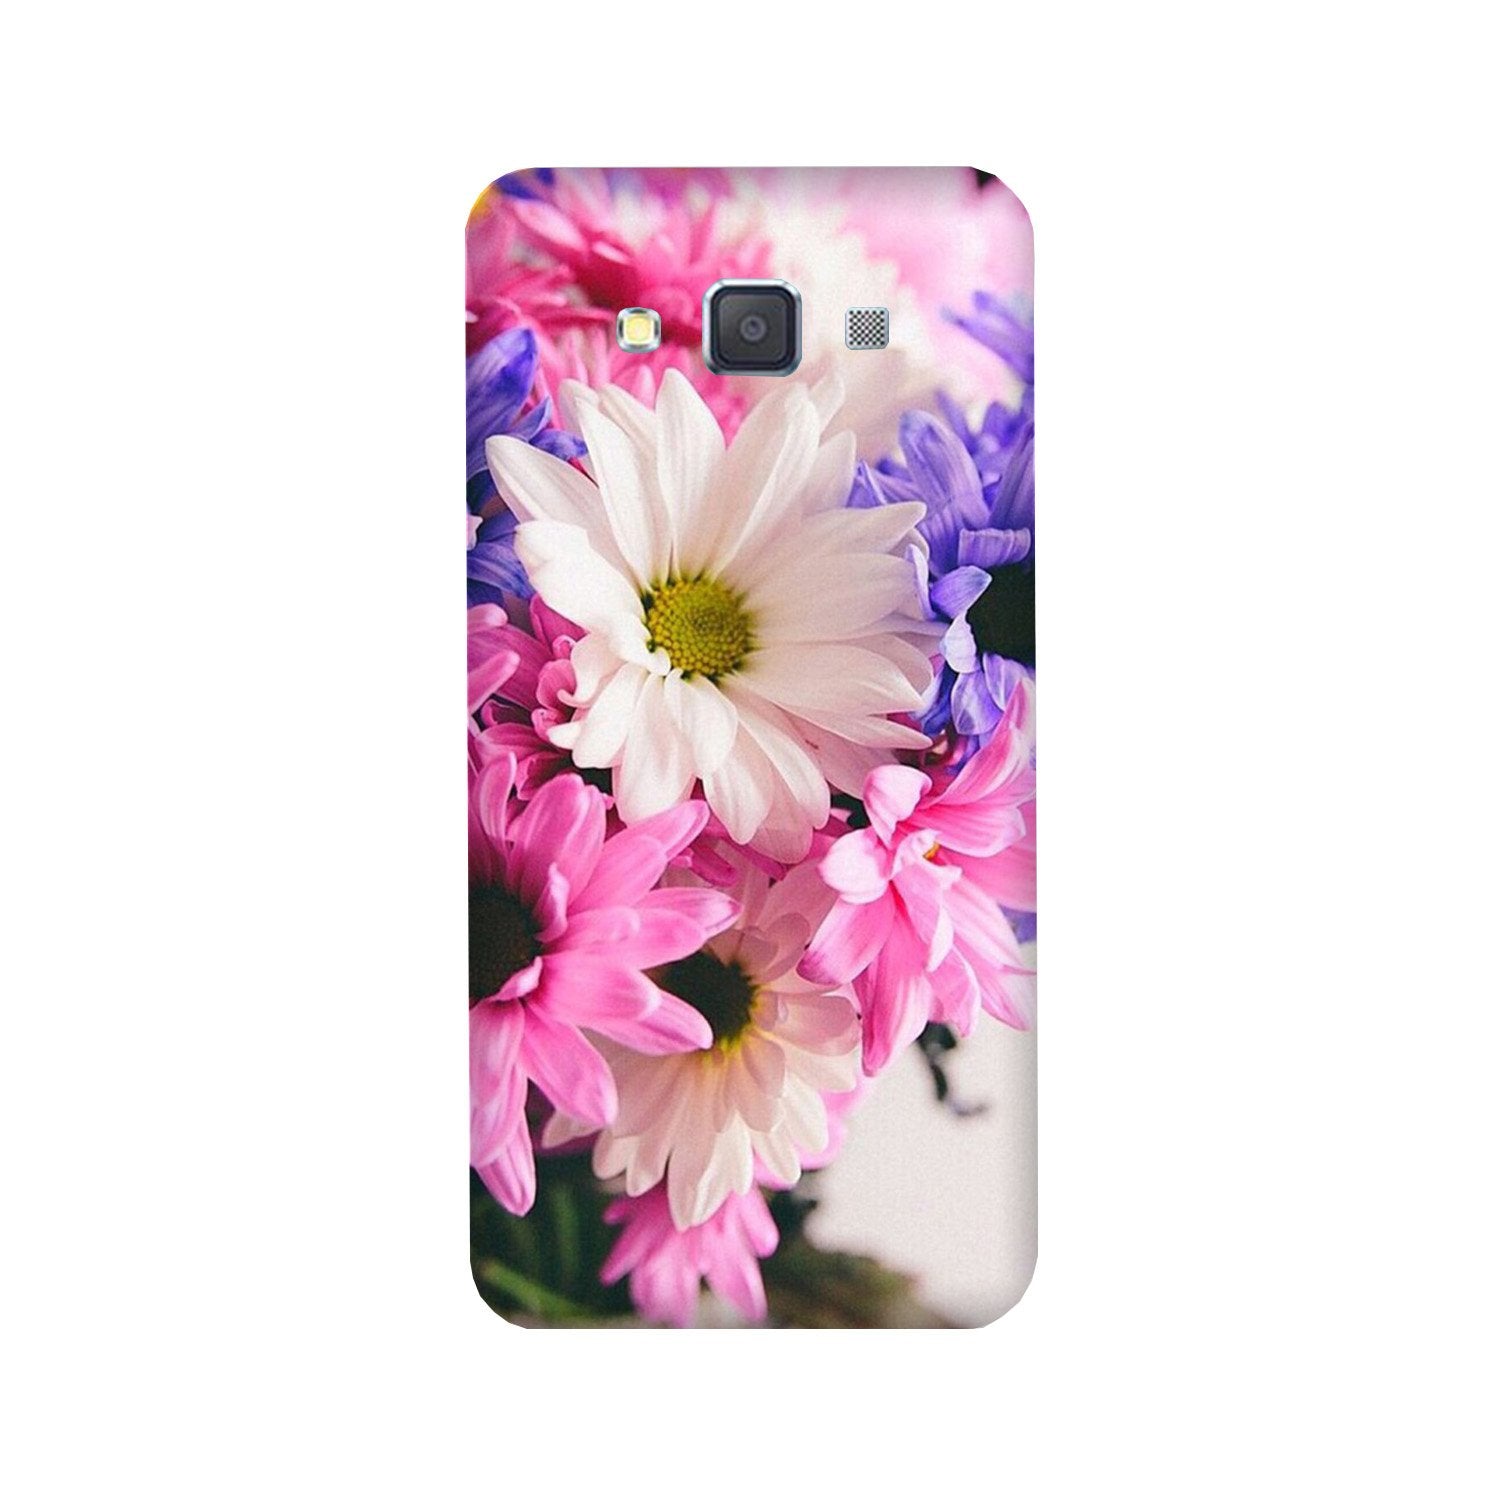 Coloful Daisy Case for Galaxy ON7/ON7 Pro